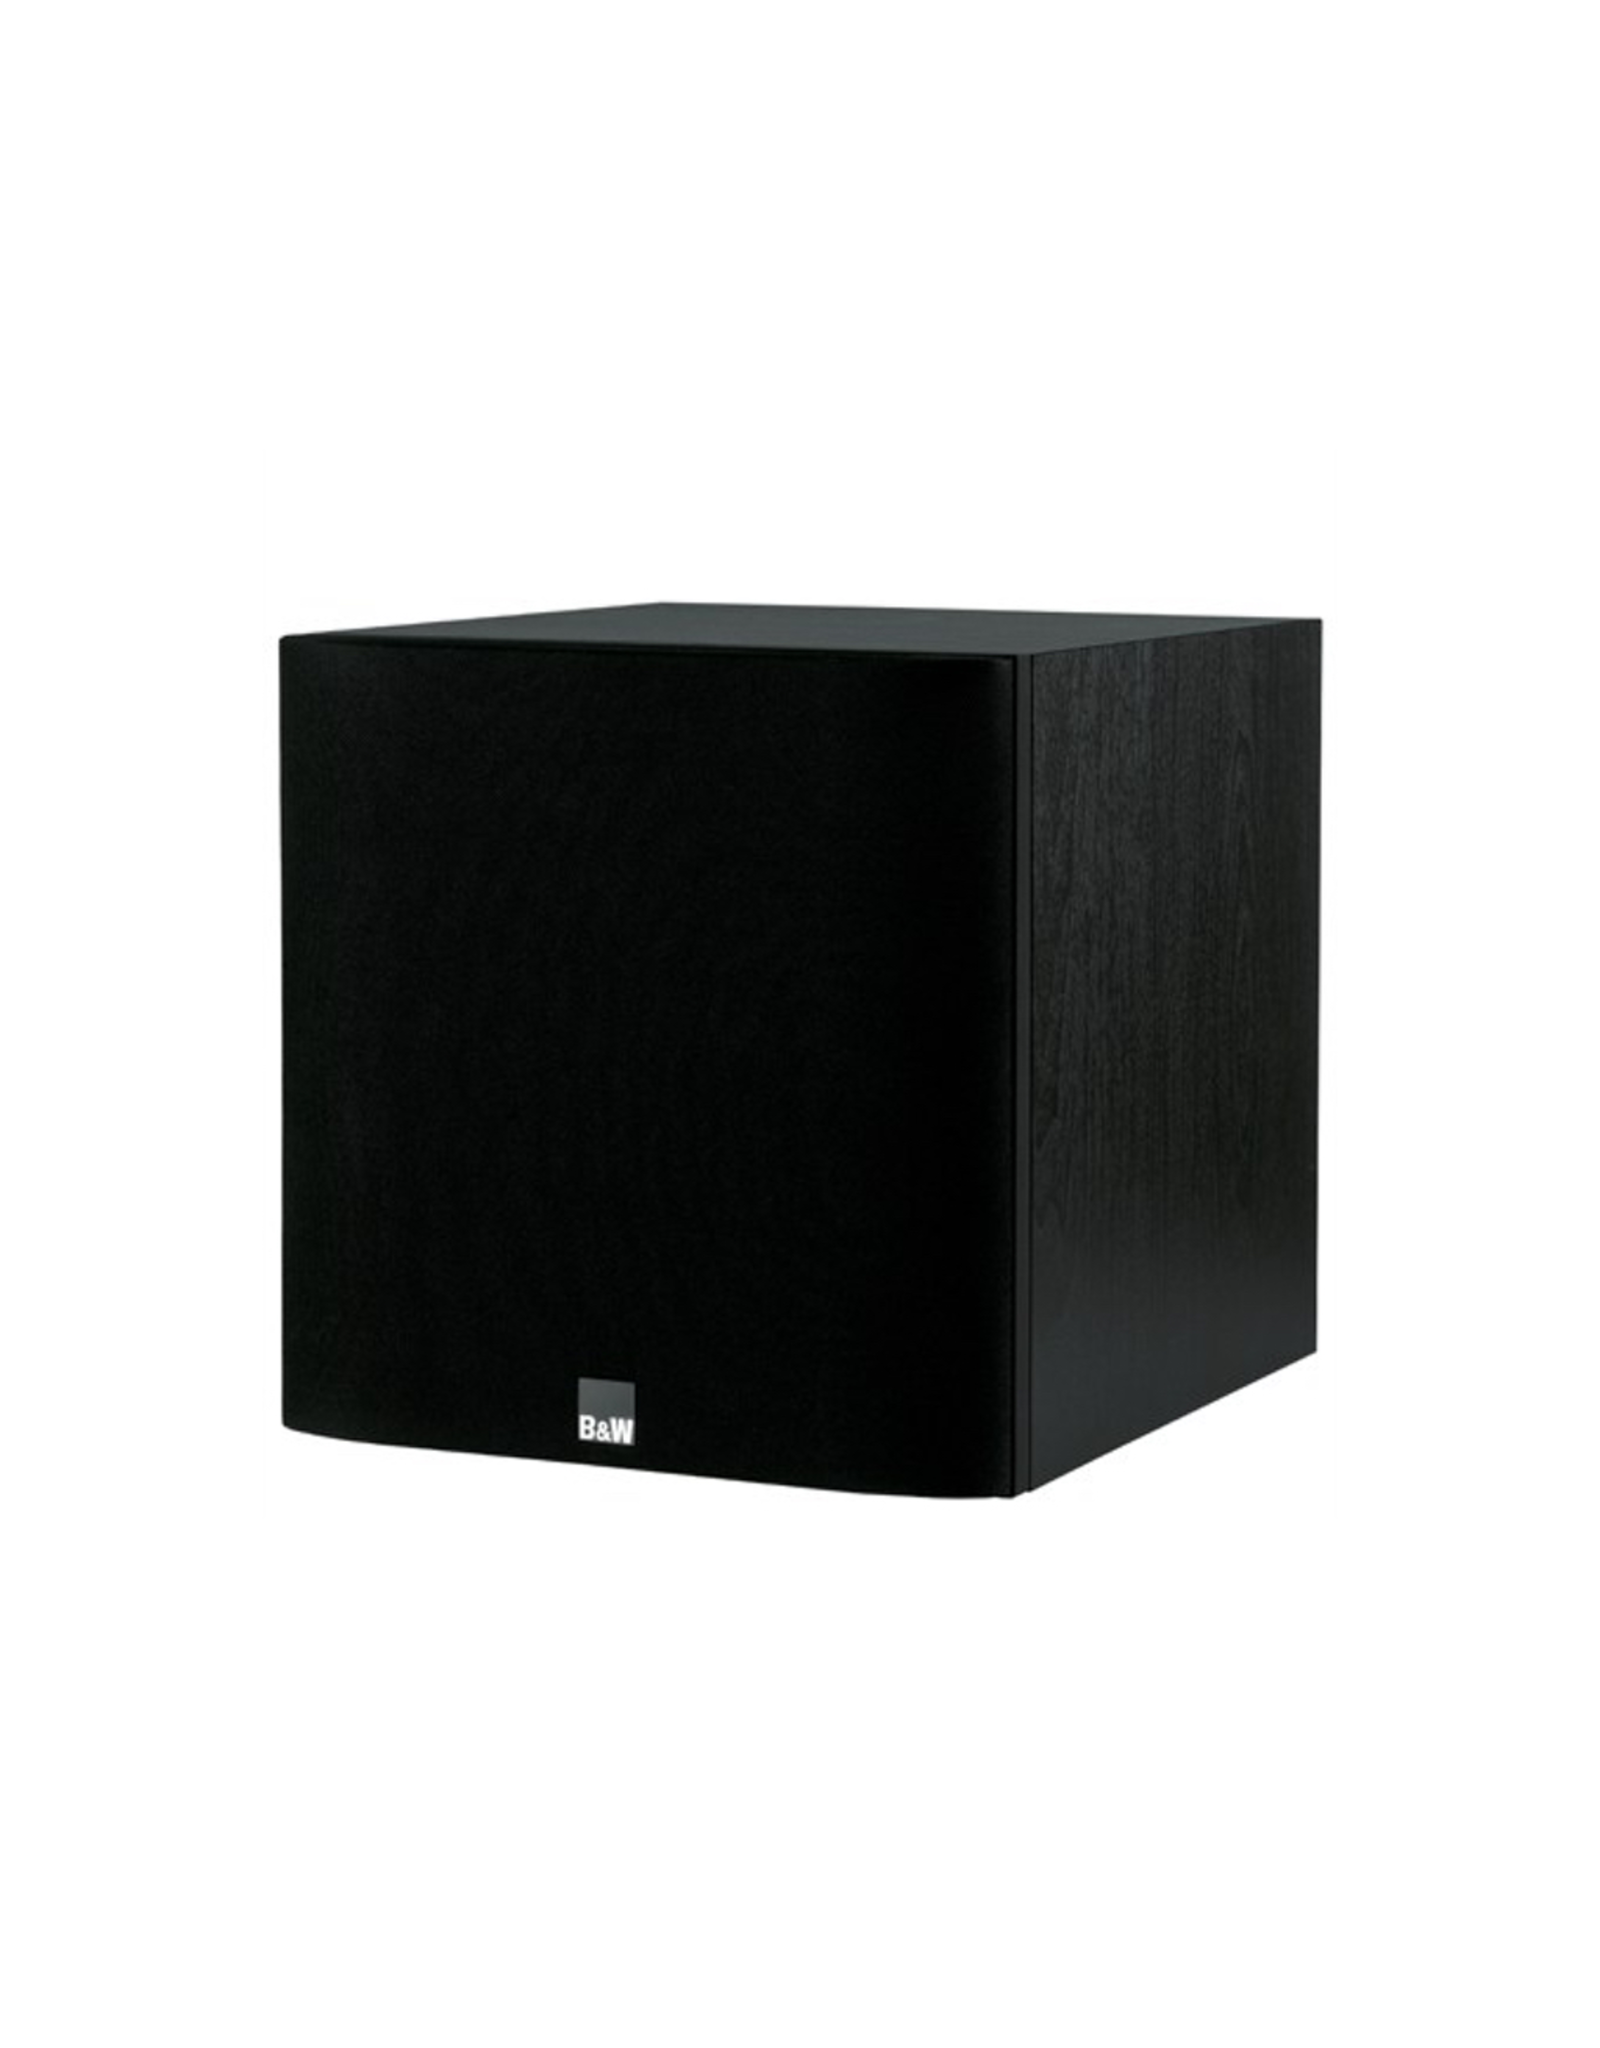 BOWERS & WILKINS B&W ASW610XP Subwoofer